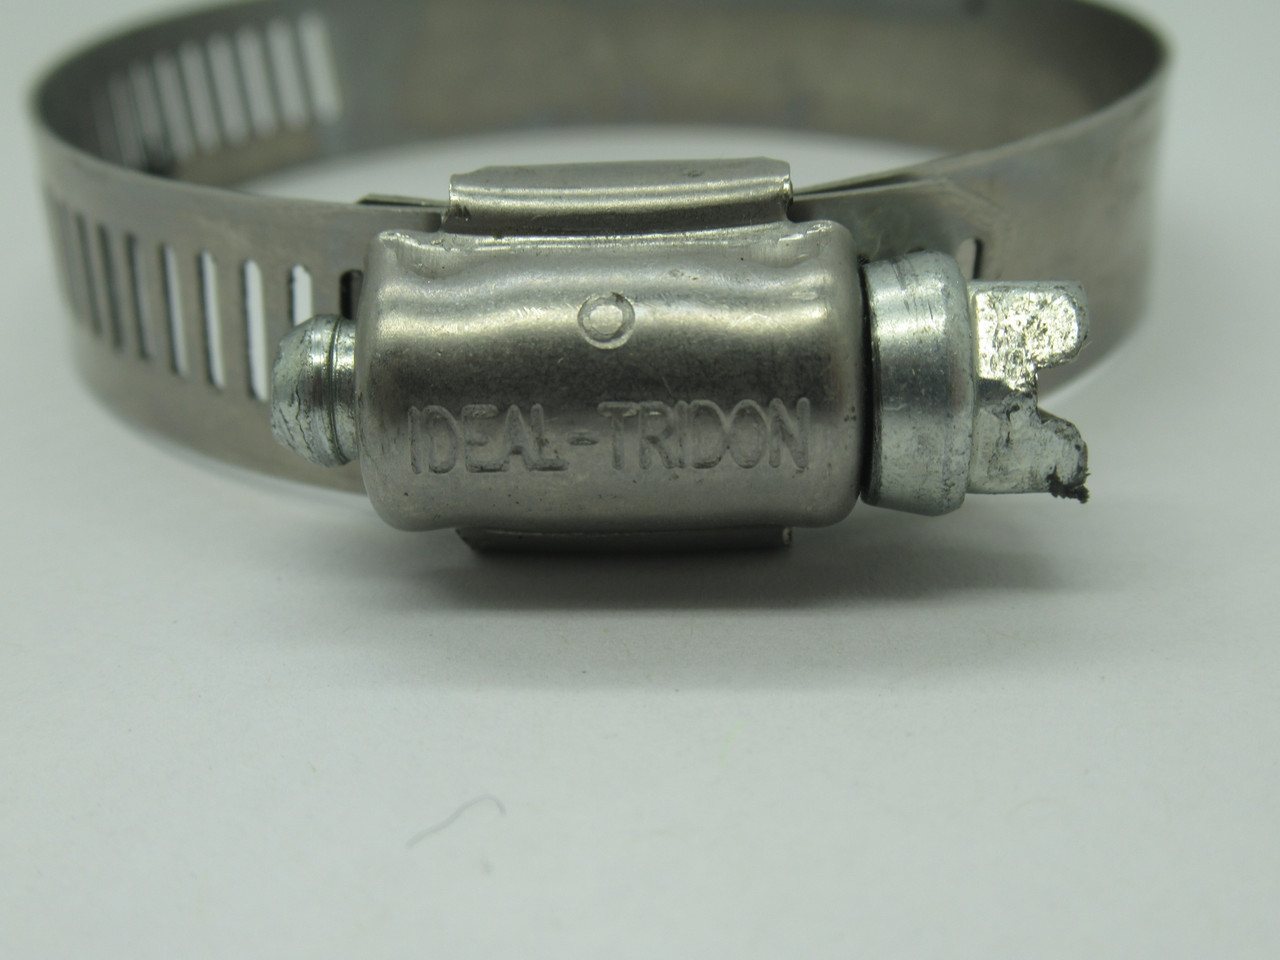 Ideal-Tridon 67004-0032 Stainless Steel Hose Clamp Size 32 USED